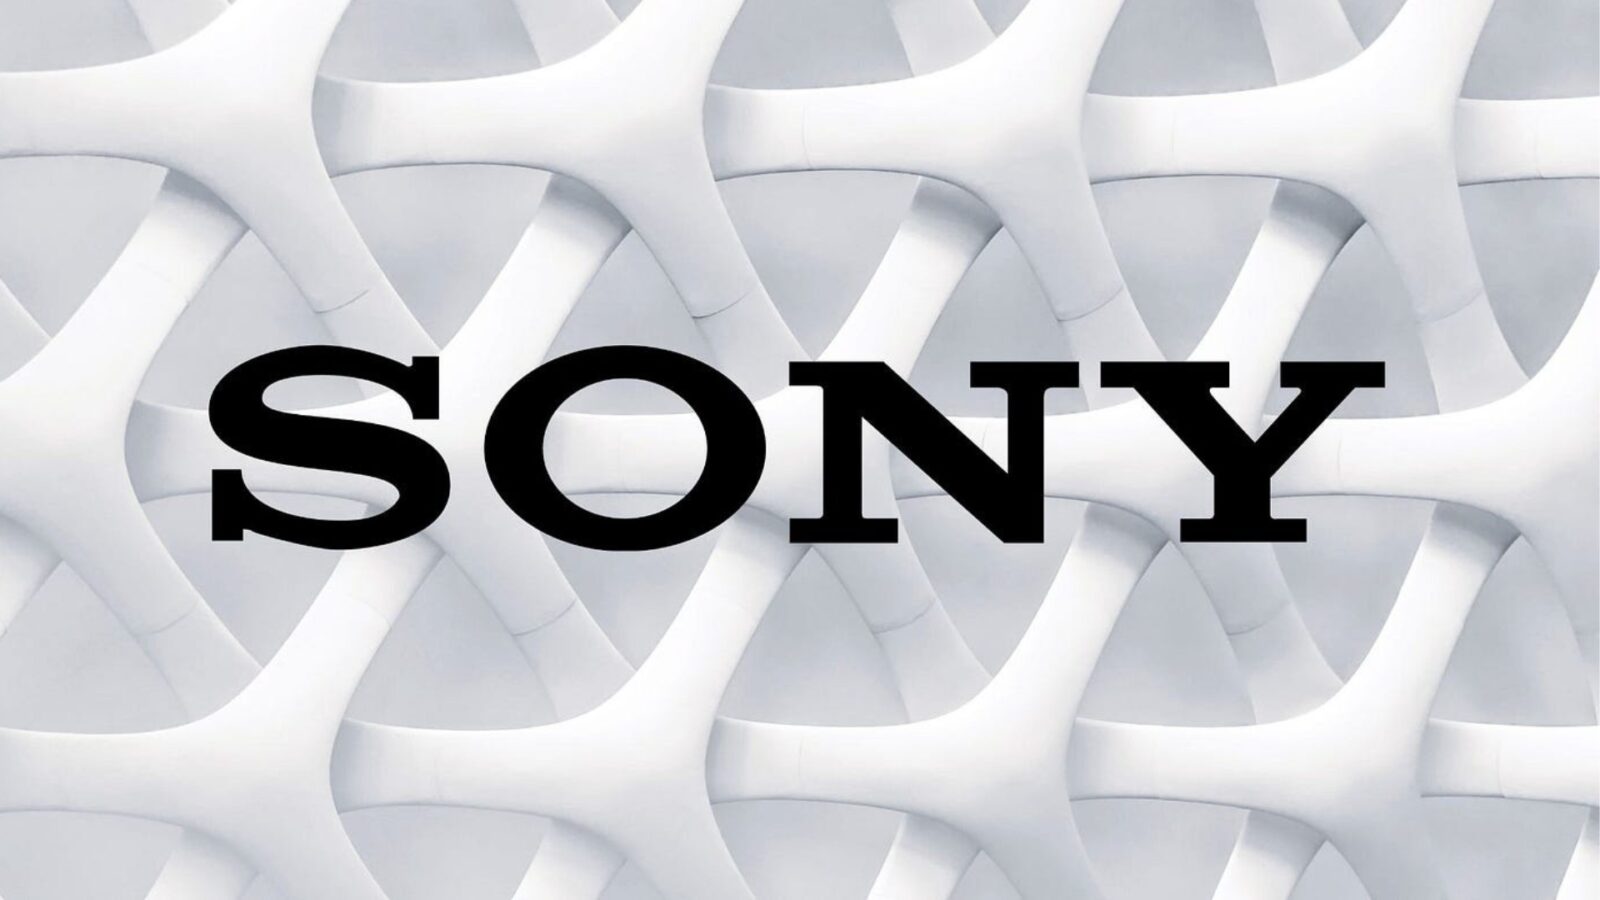 Sony Introduces a Blockchain Gaming Innovation with Super-Fungible Tokens